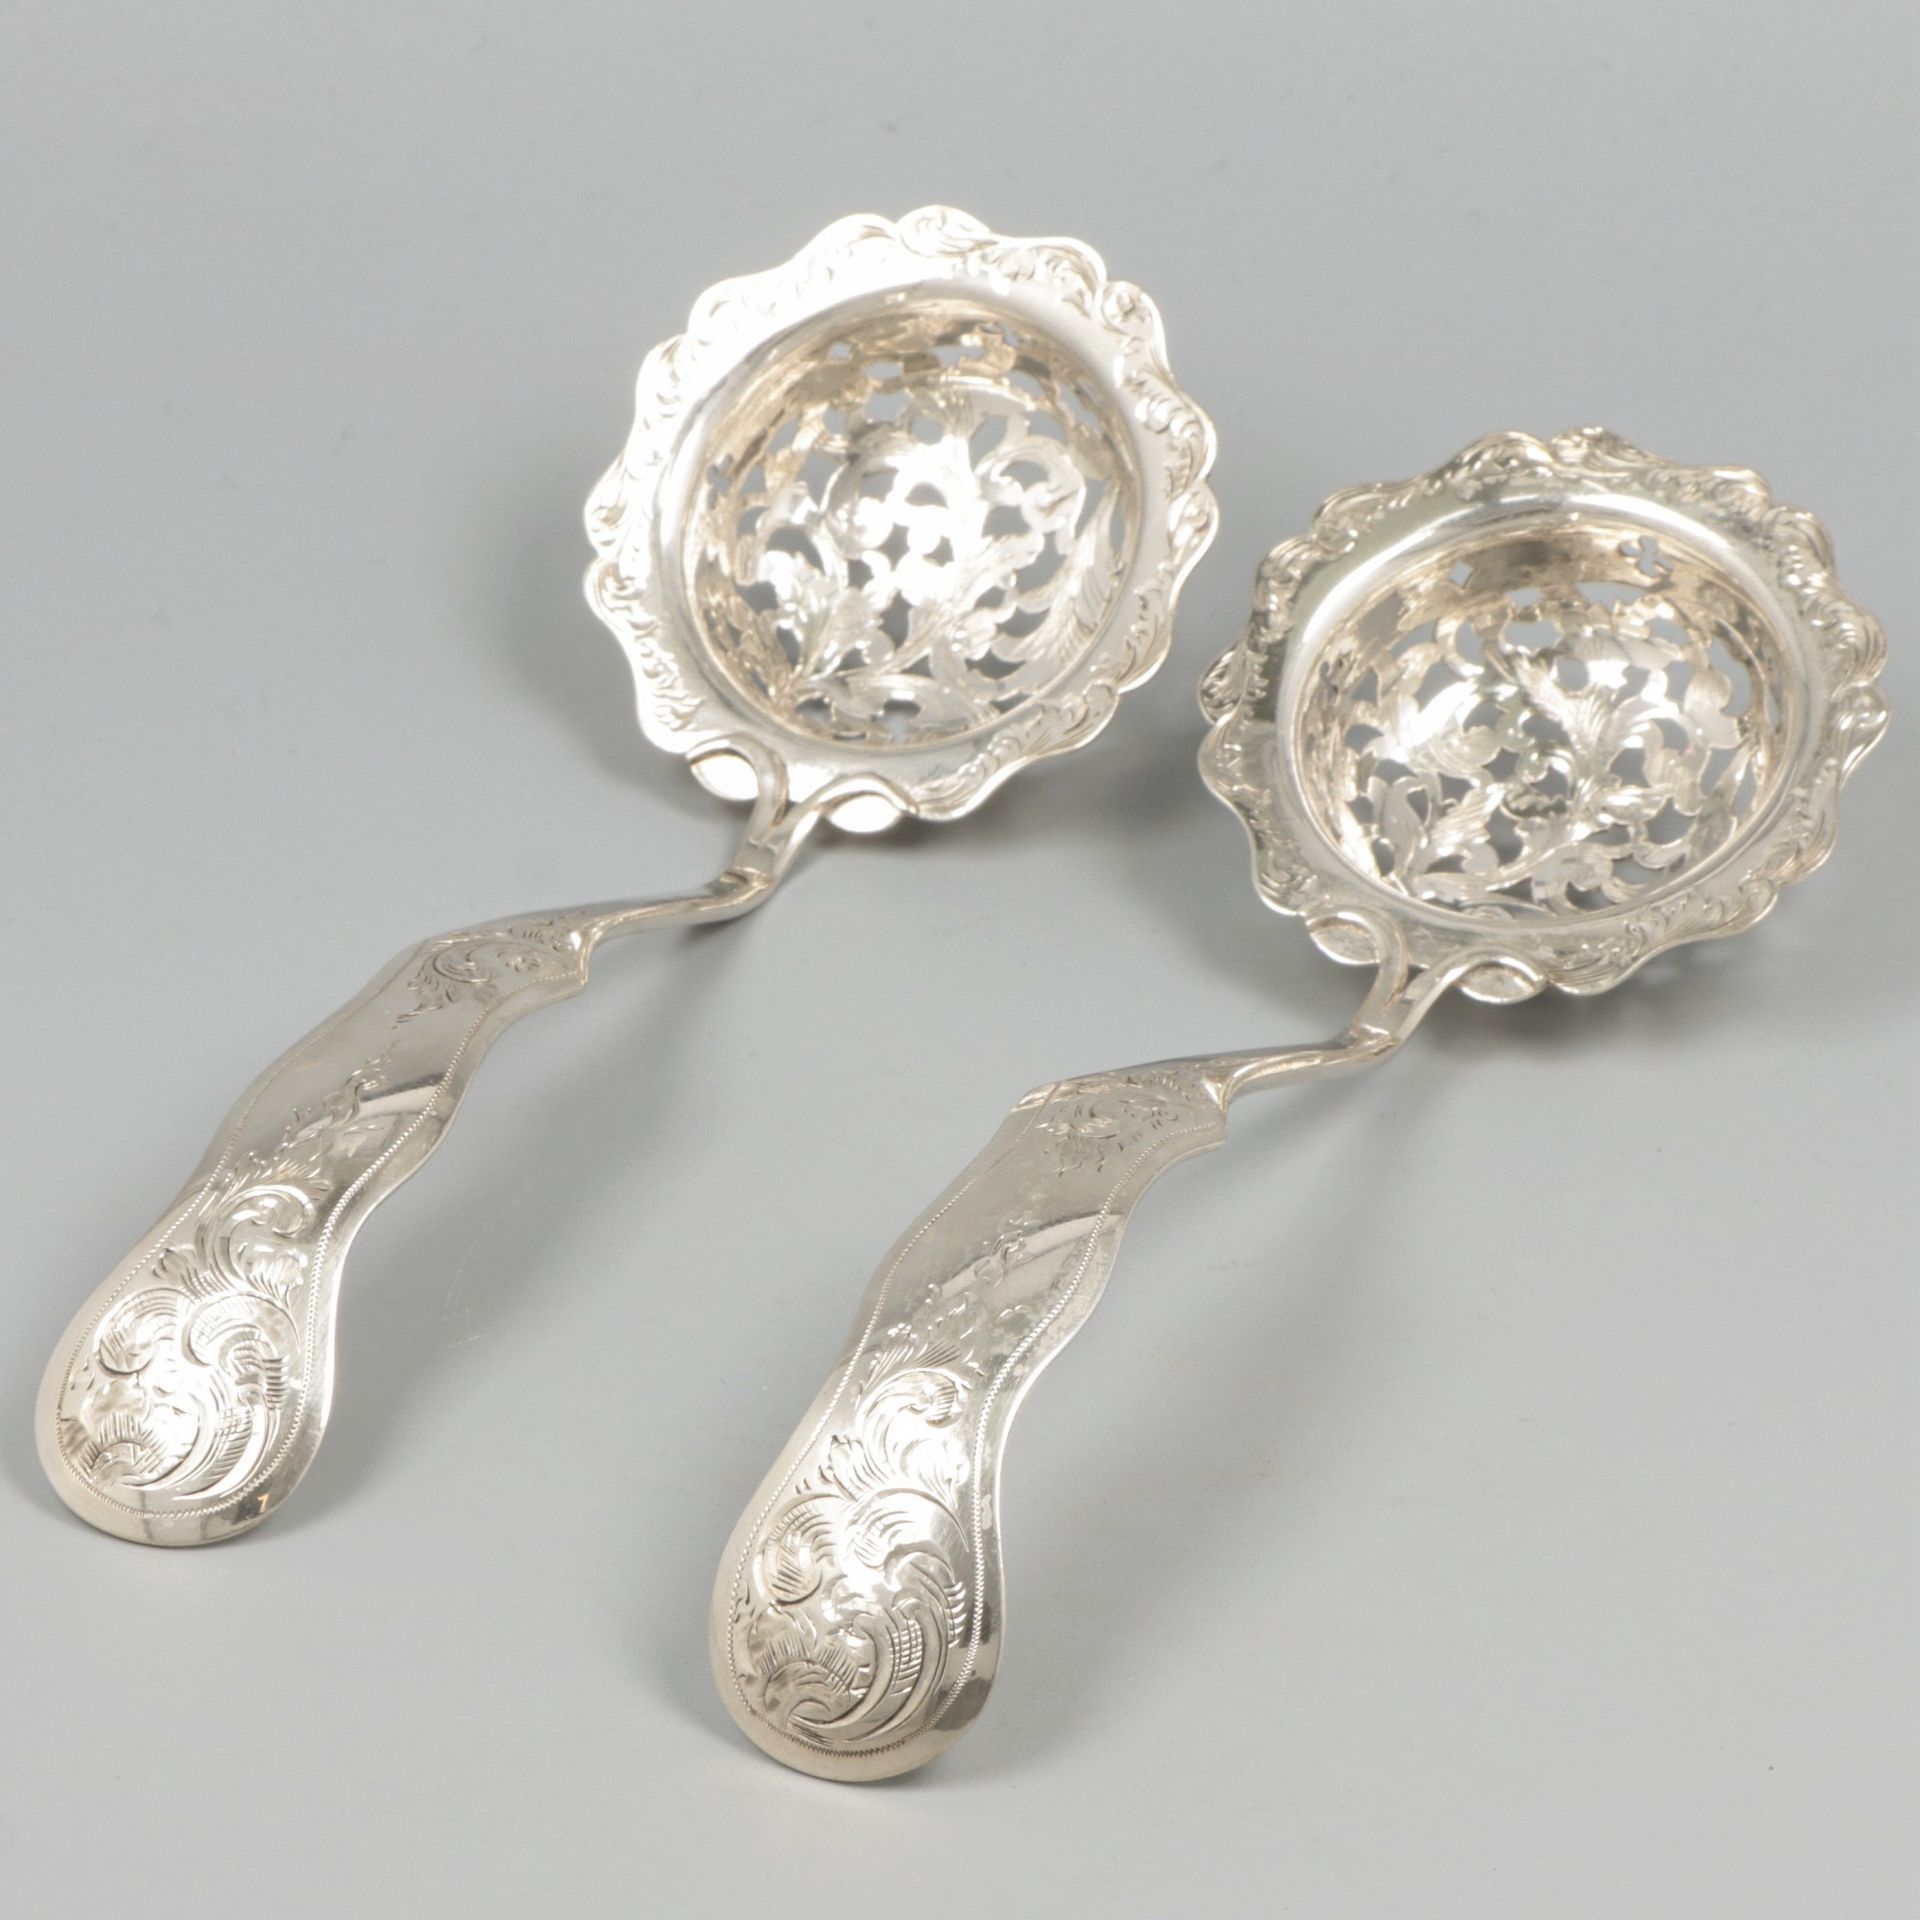 2-piece set of silver sifter spoons. Bellissimo set con rocailles incise e decor&hellip;